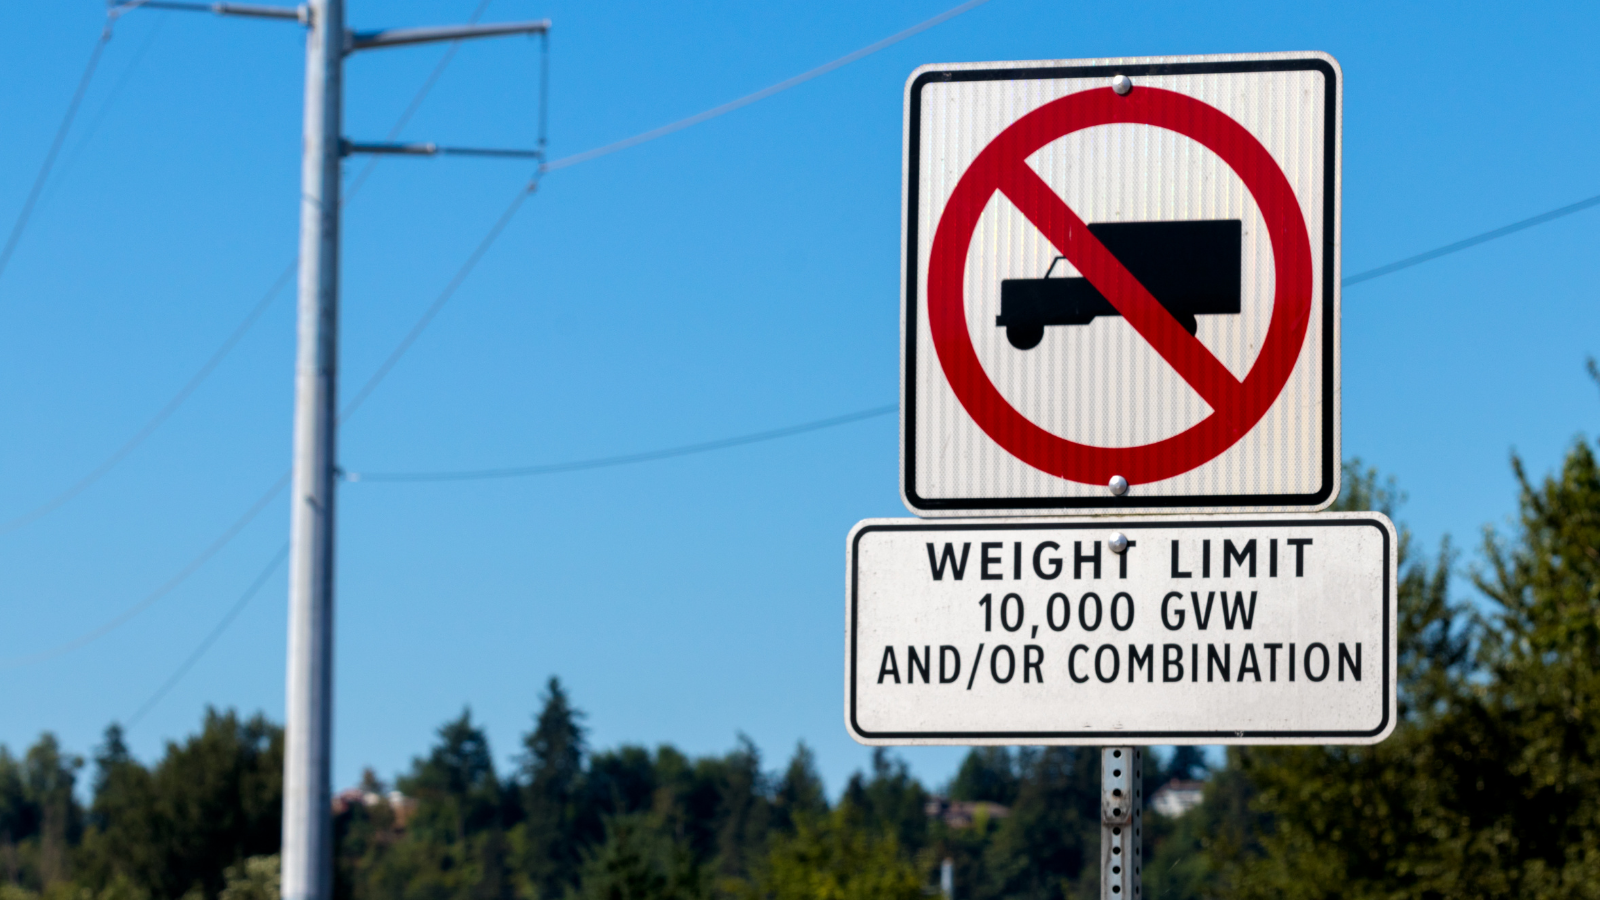 Image of a signpost located on a sunny street that specifies a weight limit for vehicles. The sign has the weight limited at 10,000 GVW and has a graphic of a truck circled in red.